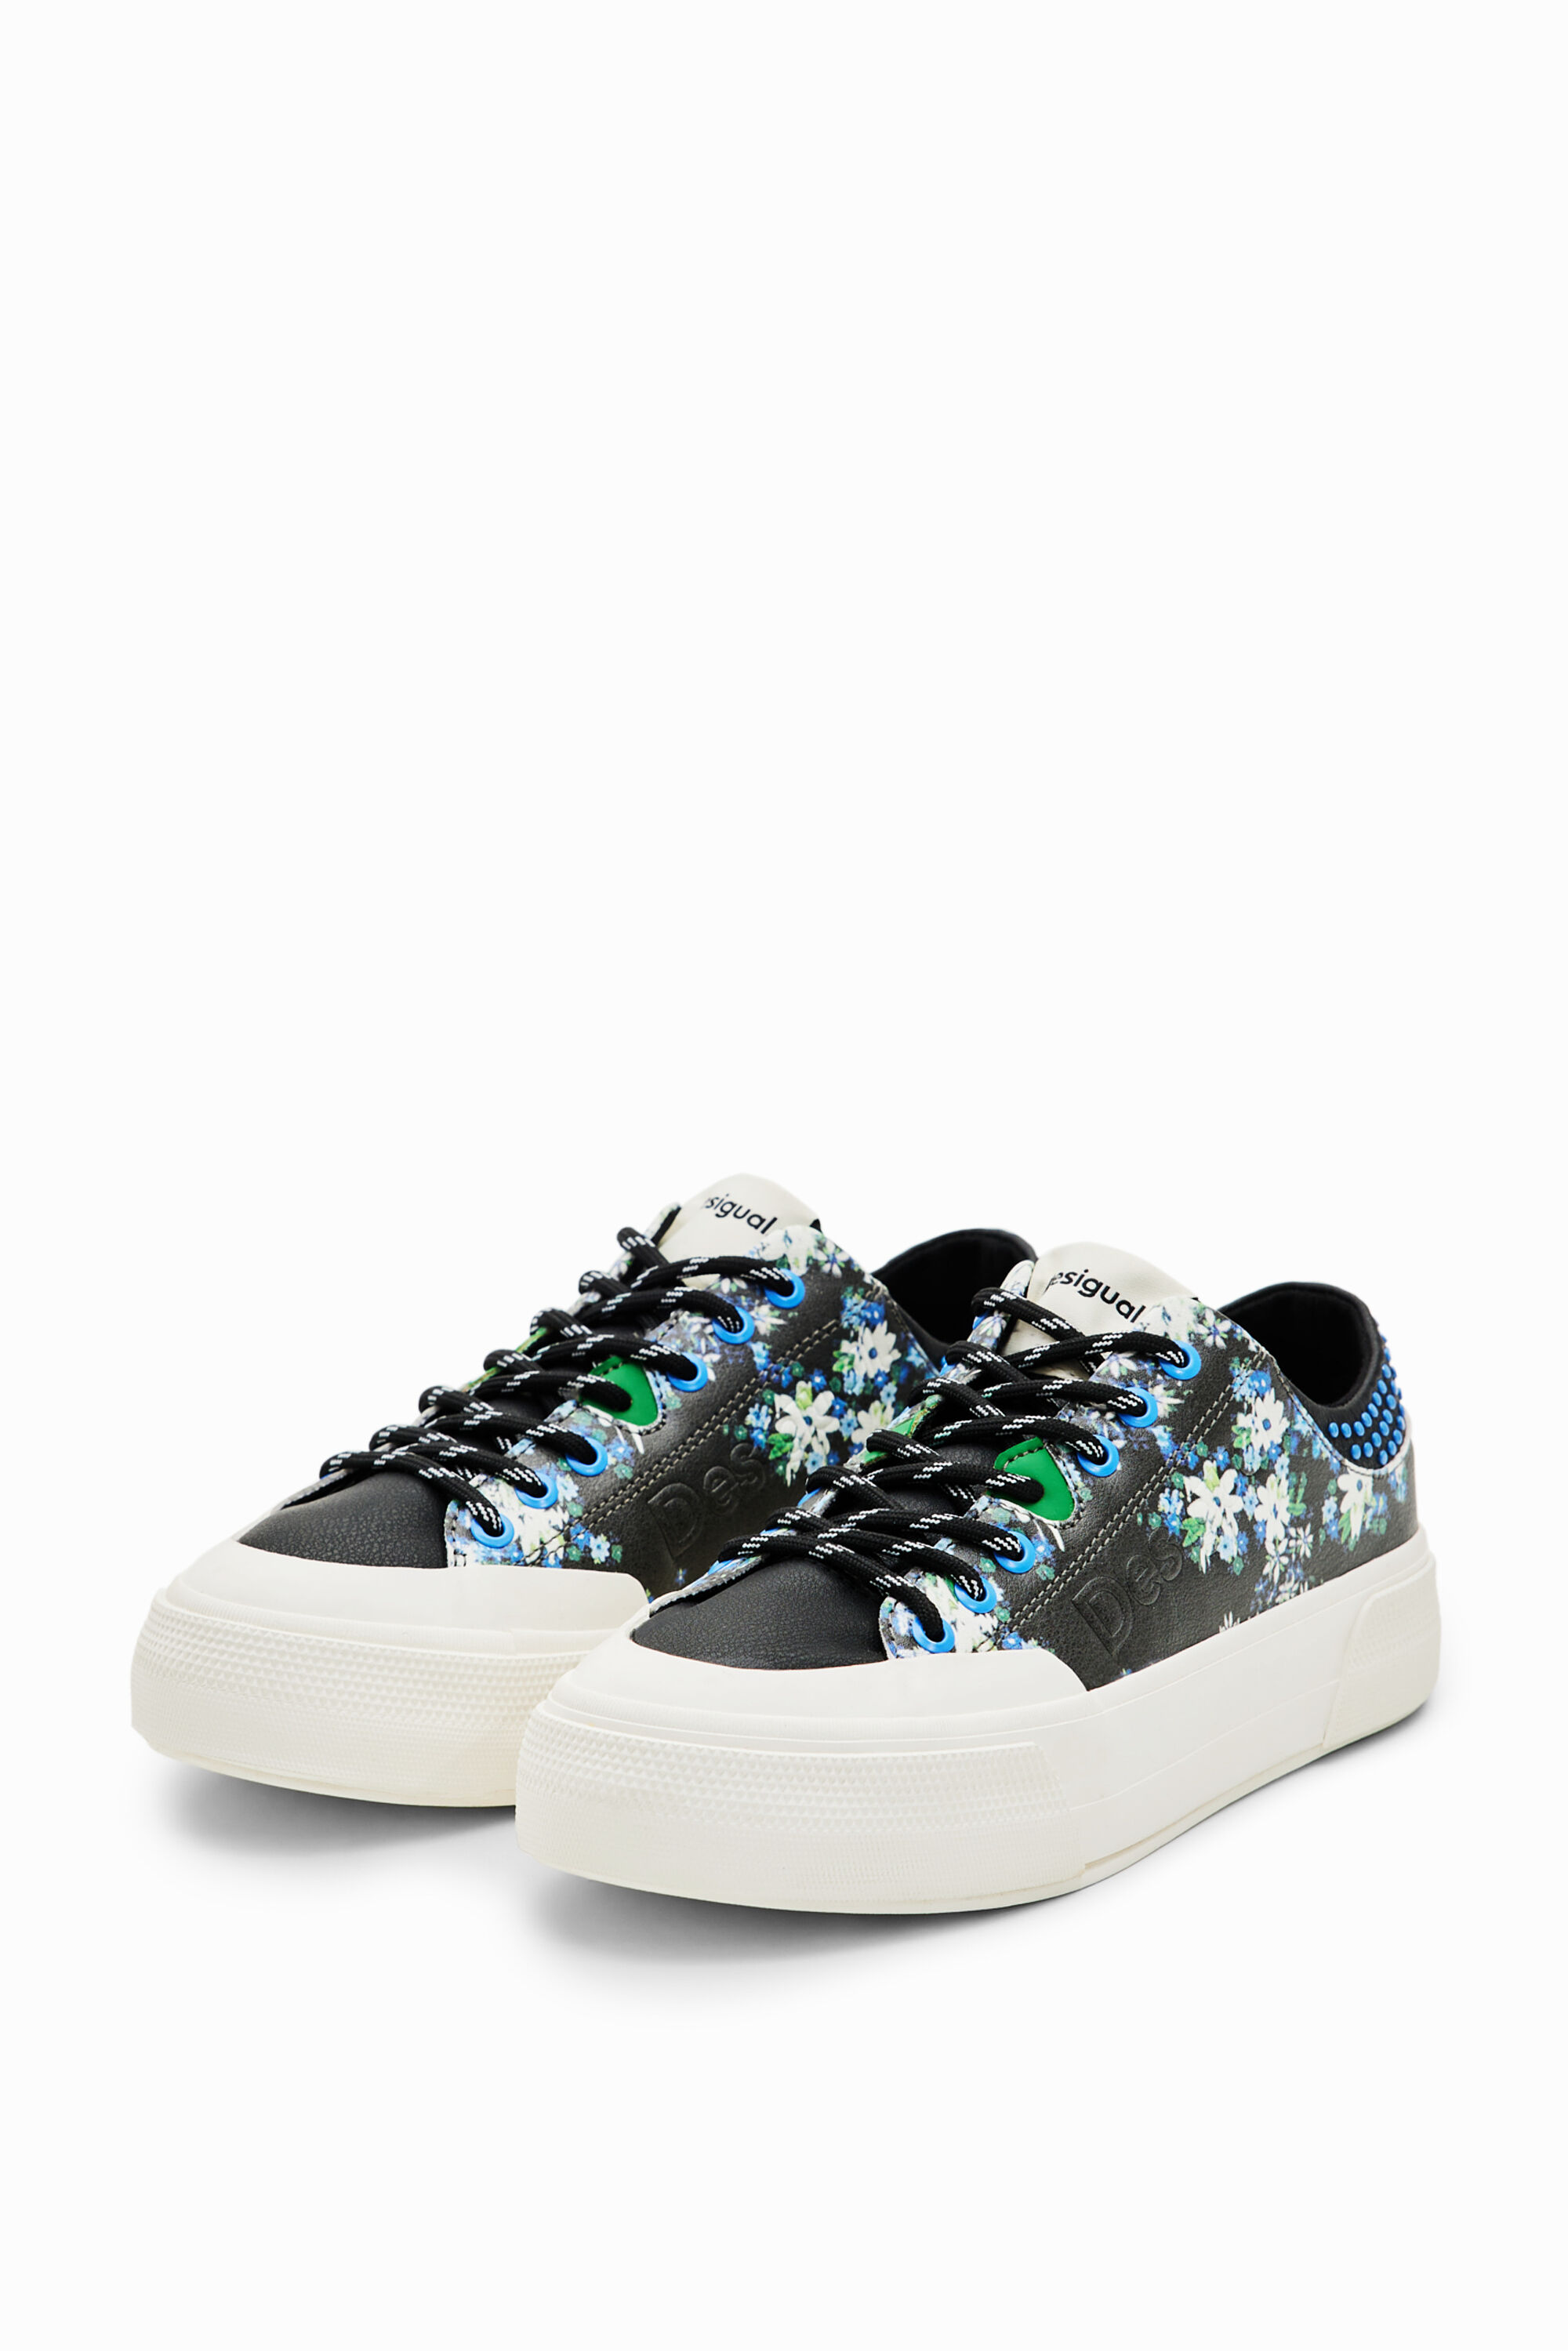 Floral platform sneakers - MATERIAL FINISHES - 40